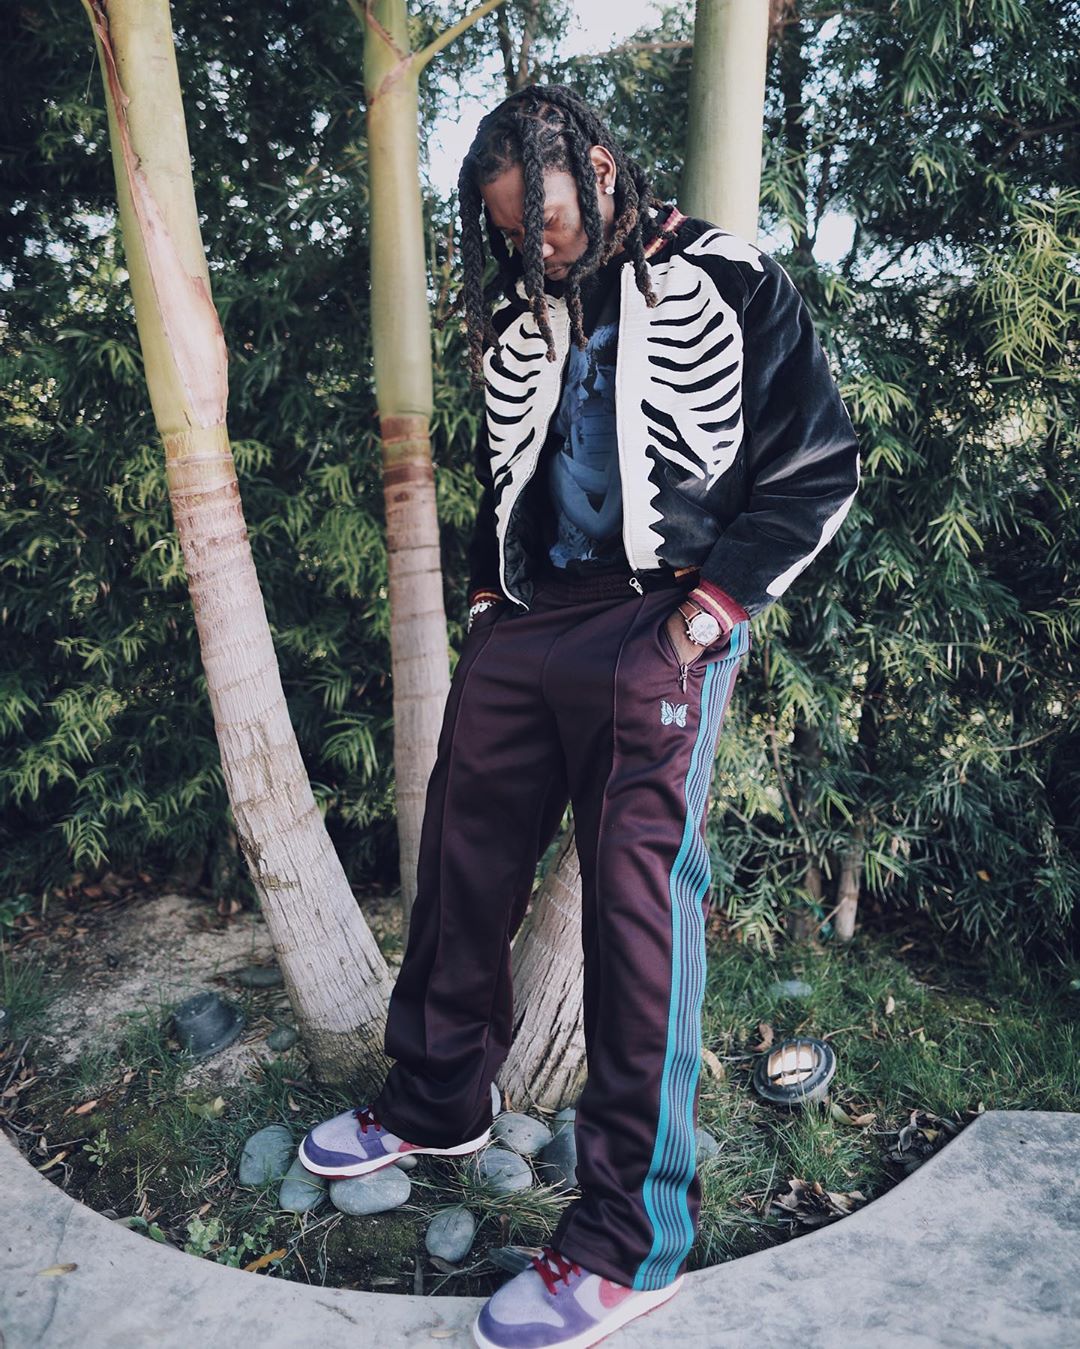 SPOTTED: Offset In Needles, Kapital & Nike Dunks – PAUSE Online